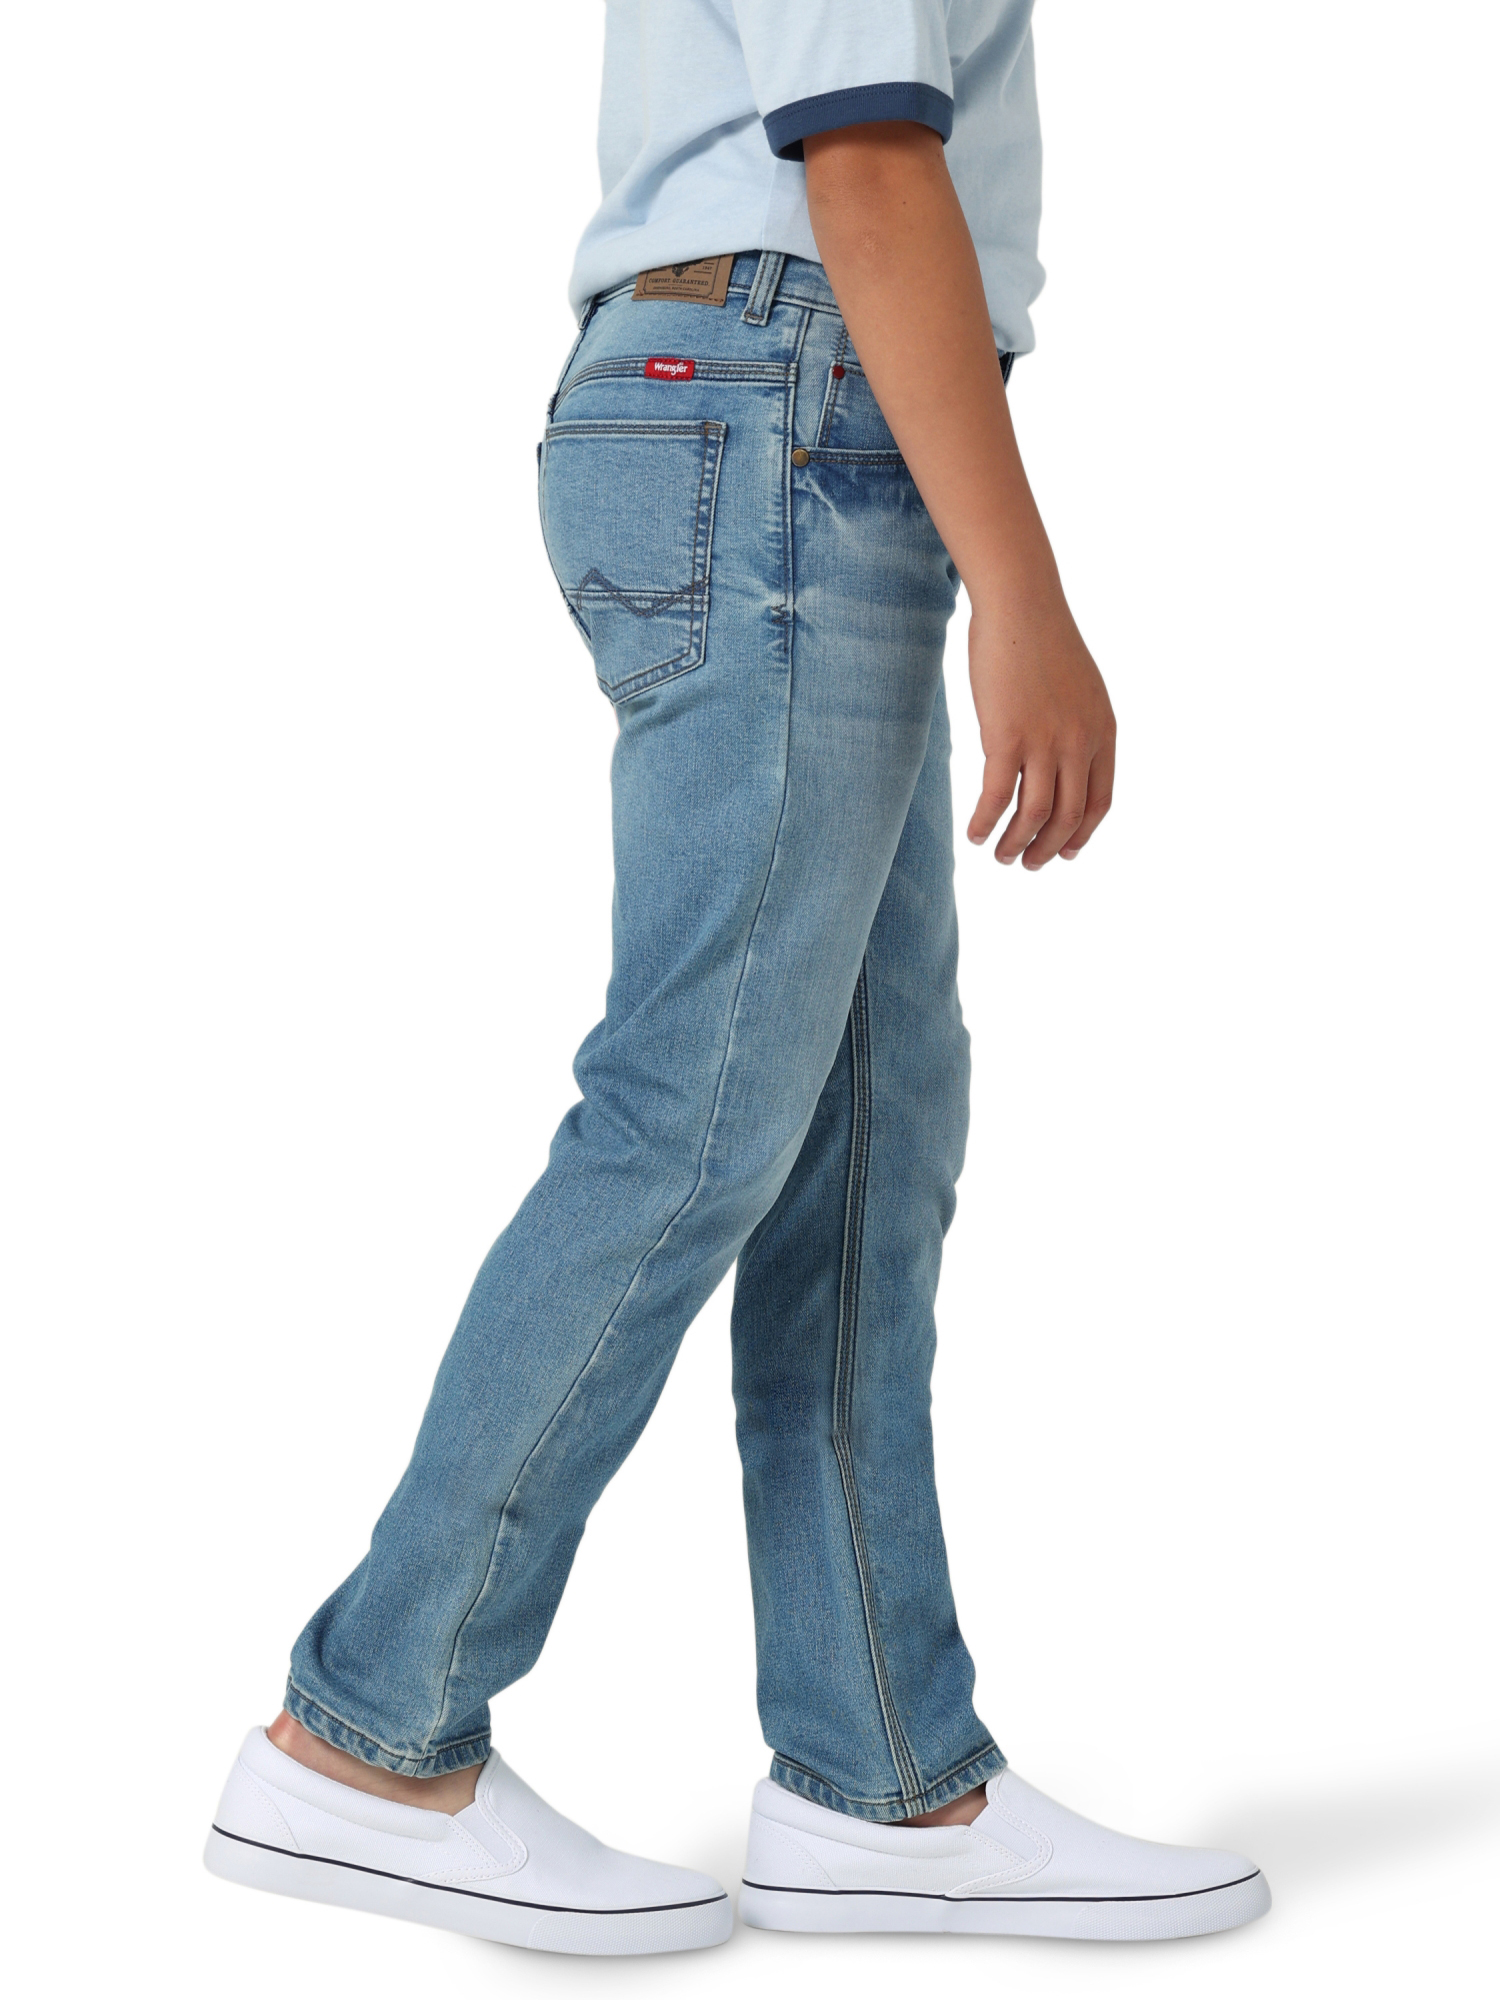 Wrangler Boy’s Indigood Slim Fit Jean with Adjust to Fit Waistband ...